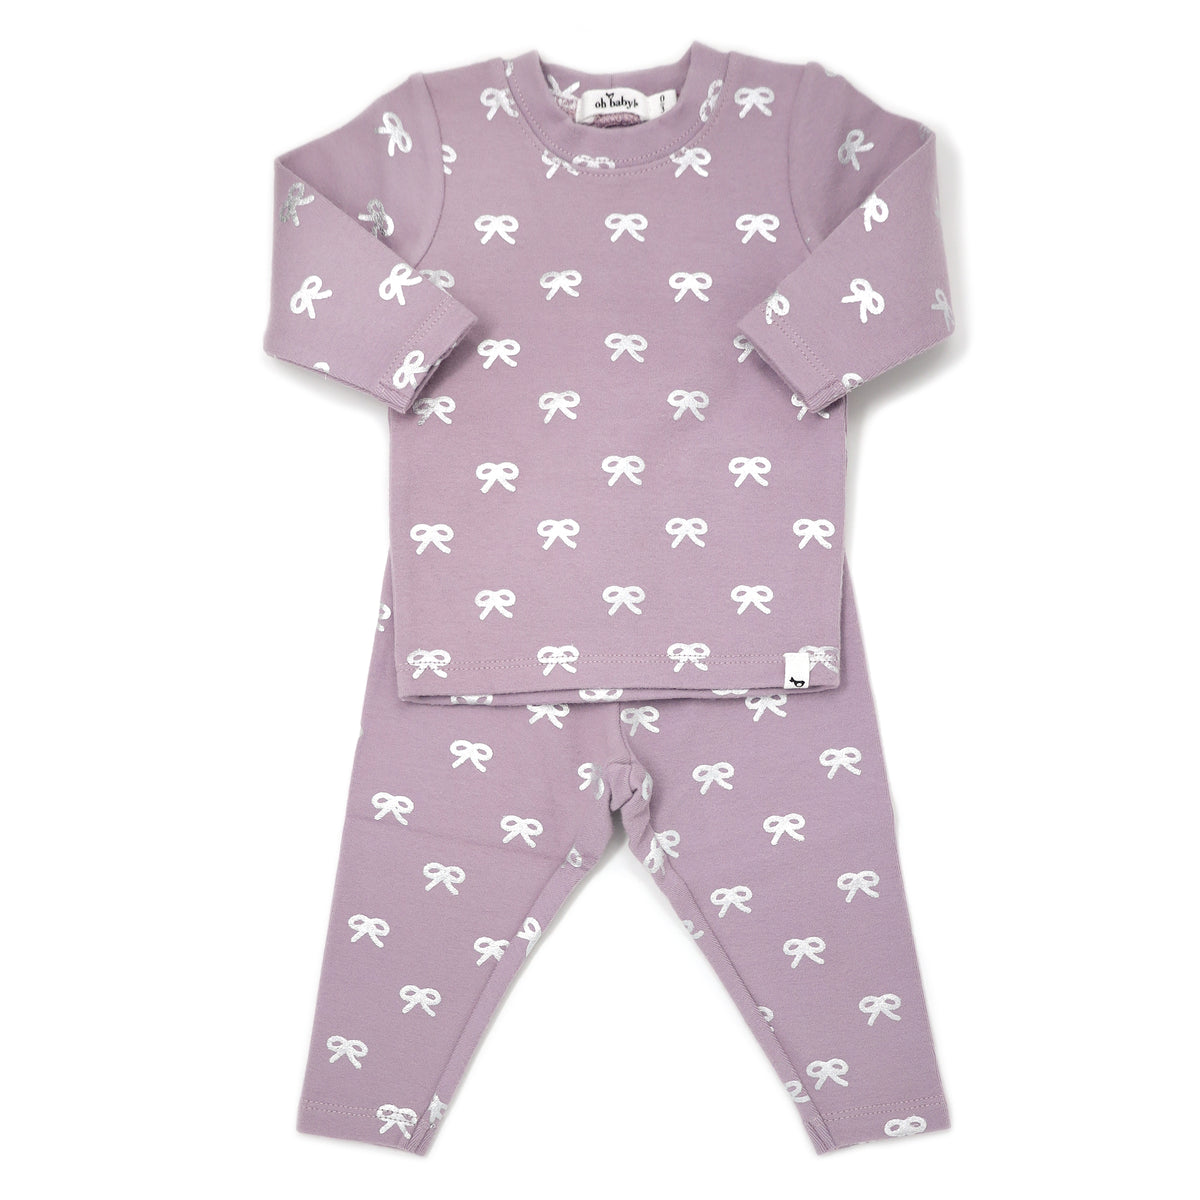 oh baby!  Two Piece Set - Silver Bows - Dusty Lavender